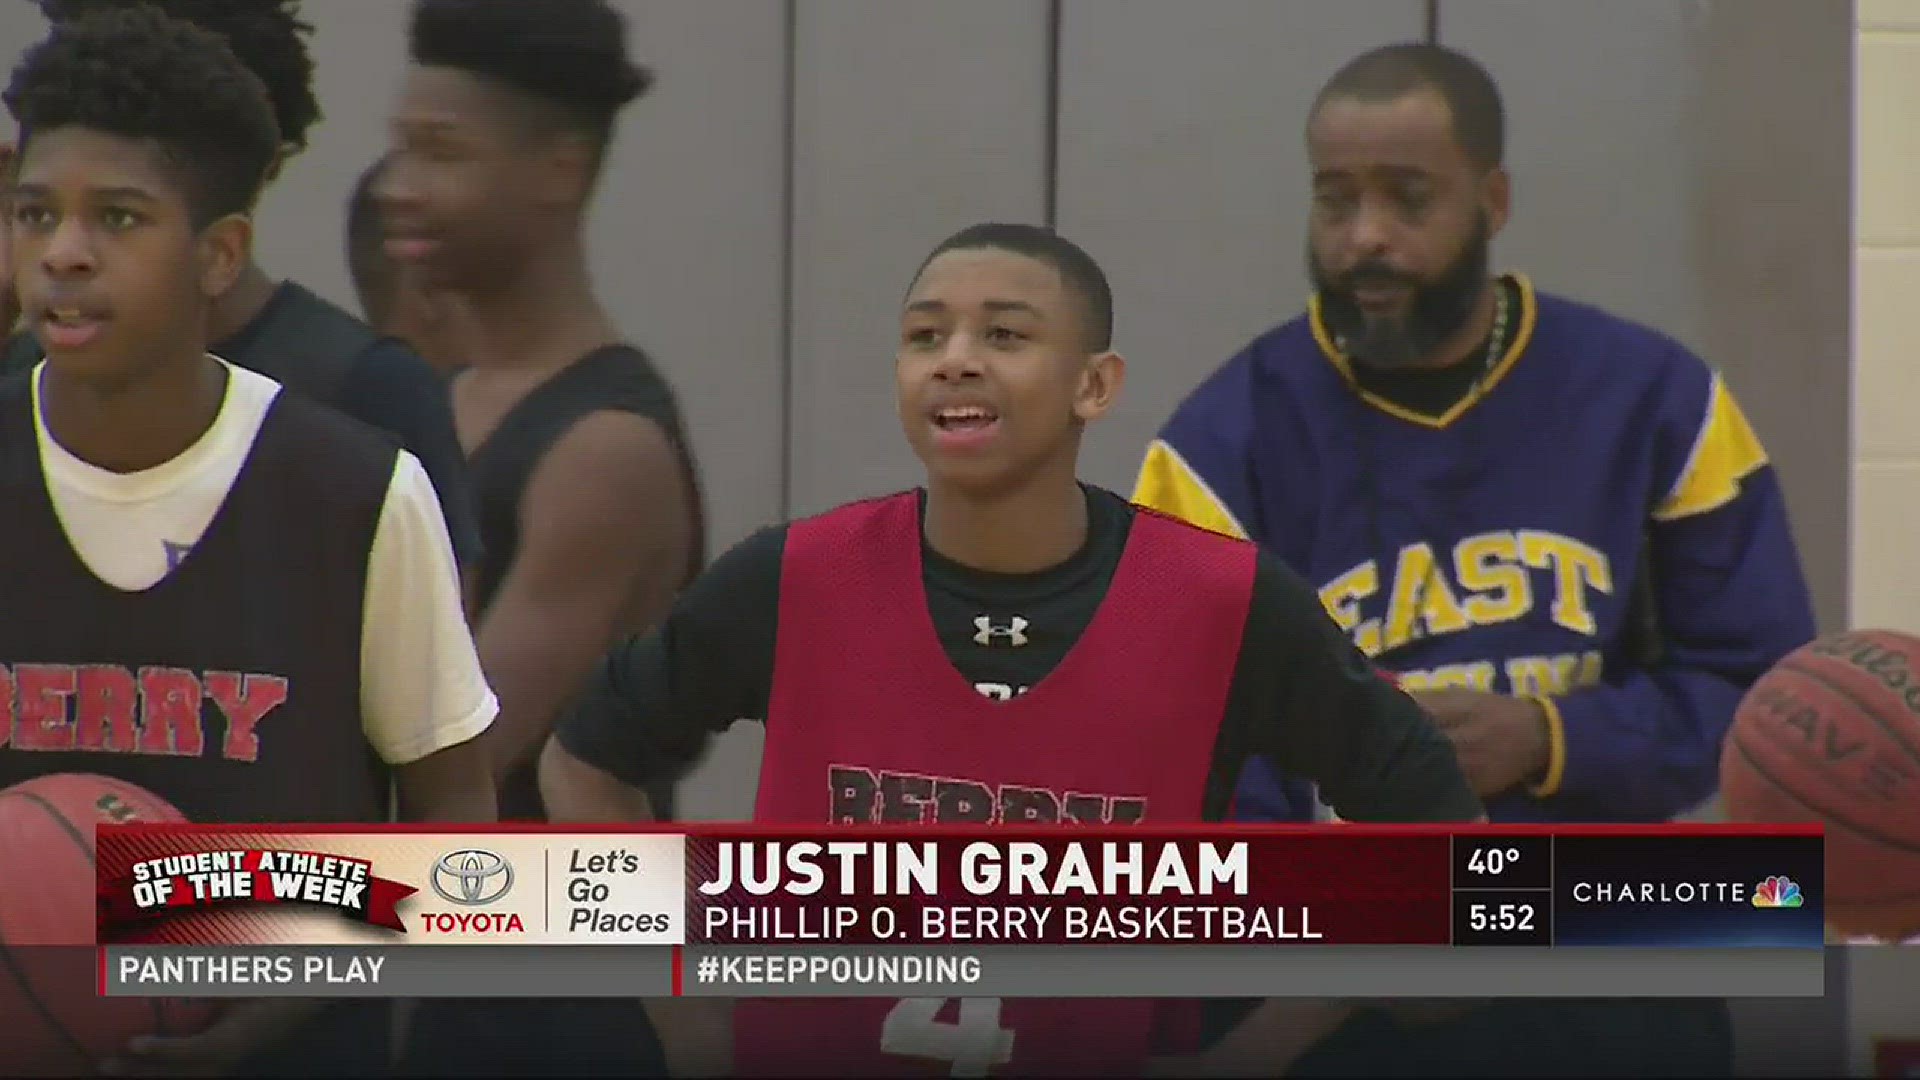 NBC Charlotte's Nick Carboni introduces us to Justin Graham: a Phillip O'Berry basketball player who is proving to be a role model on the court, in the classroom and across our community.